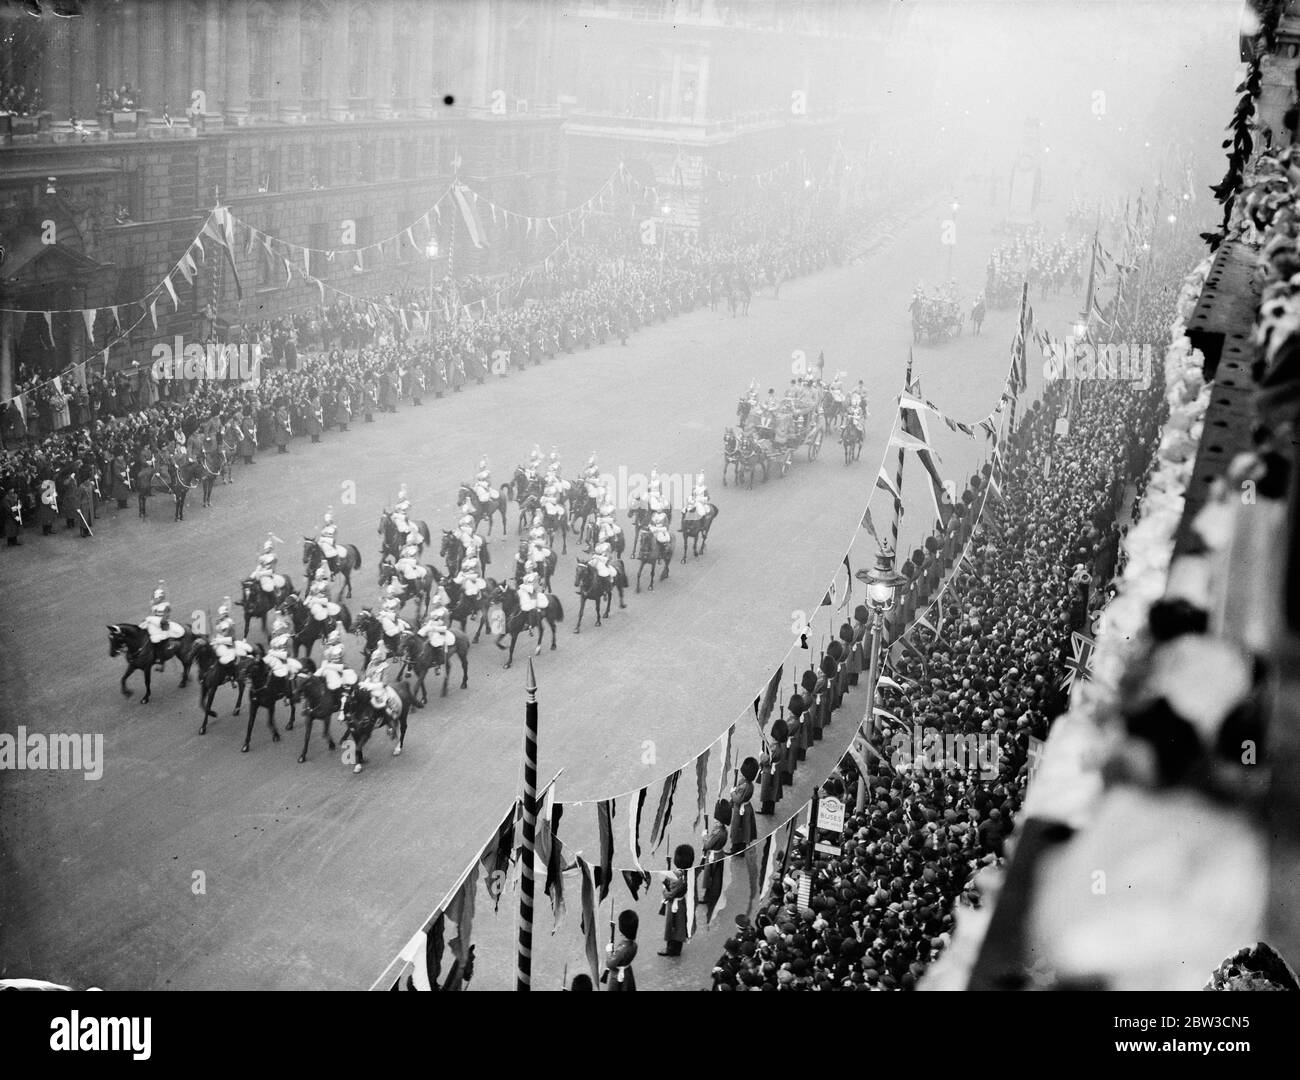 Royal wedding of the Duke of Kent and Princess Marina of Greece and Denmark . A view showing the procession of carriages and their cavalry escort of Horseguards . 28 November 1934 Stock Photo